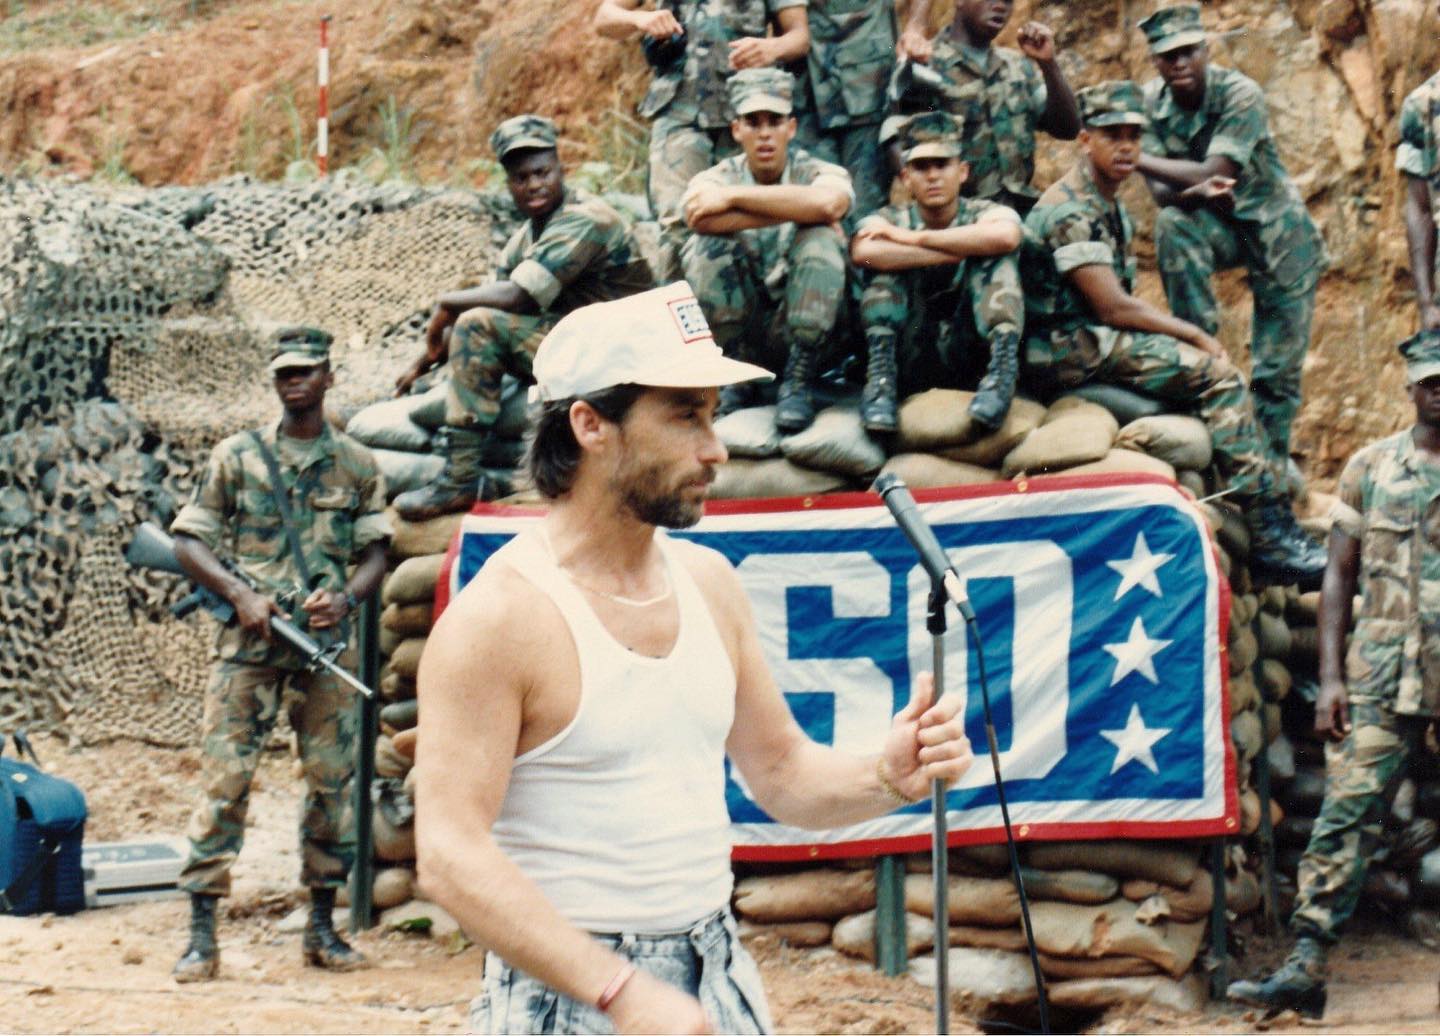 Preceding the invasion of Panama in 1989, President George Bush (41) asked me to fly there to raise the spirits of our troops about to go to war. We would perform in 4 separate locations in country. He also asked me to deliver a letter from him to 200 marines deep in the jungle. While in route we came under fire - my driver lost his index finger as we drove through the barrage of bullets. This picture was sent to me this week by Terry Cowan and it gives an idea of the conditions.I was honored to be called by the President of the United States to serve our military in lifting their spirits during such a tense time. 